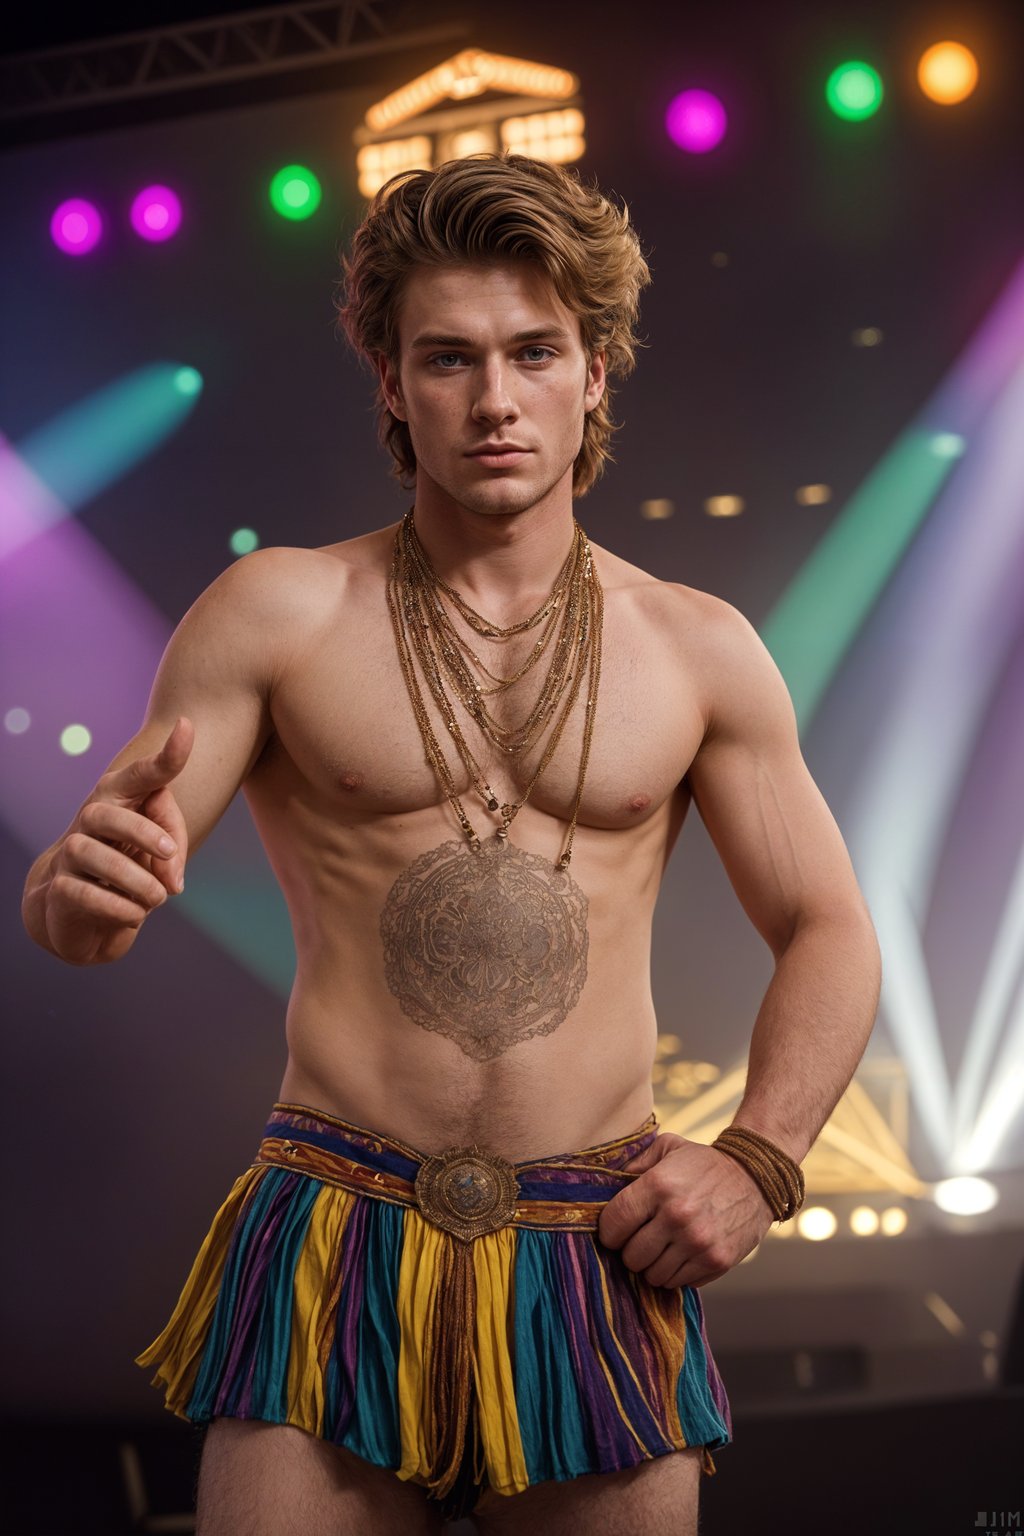 an incredibly attractive man in a festival outfit, embracing the festival vibes and posing against a backdrop of colorful stage lights and decorations